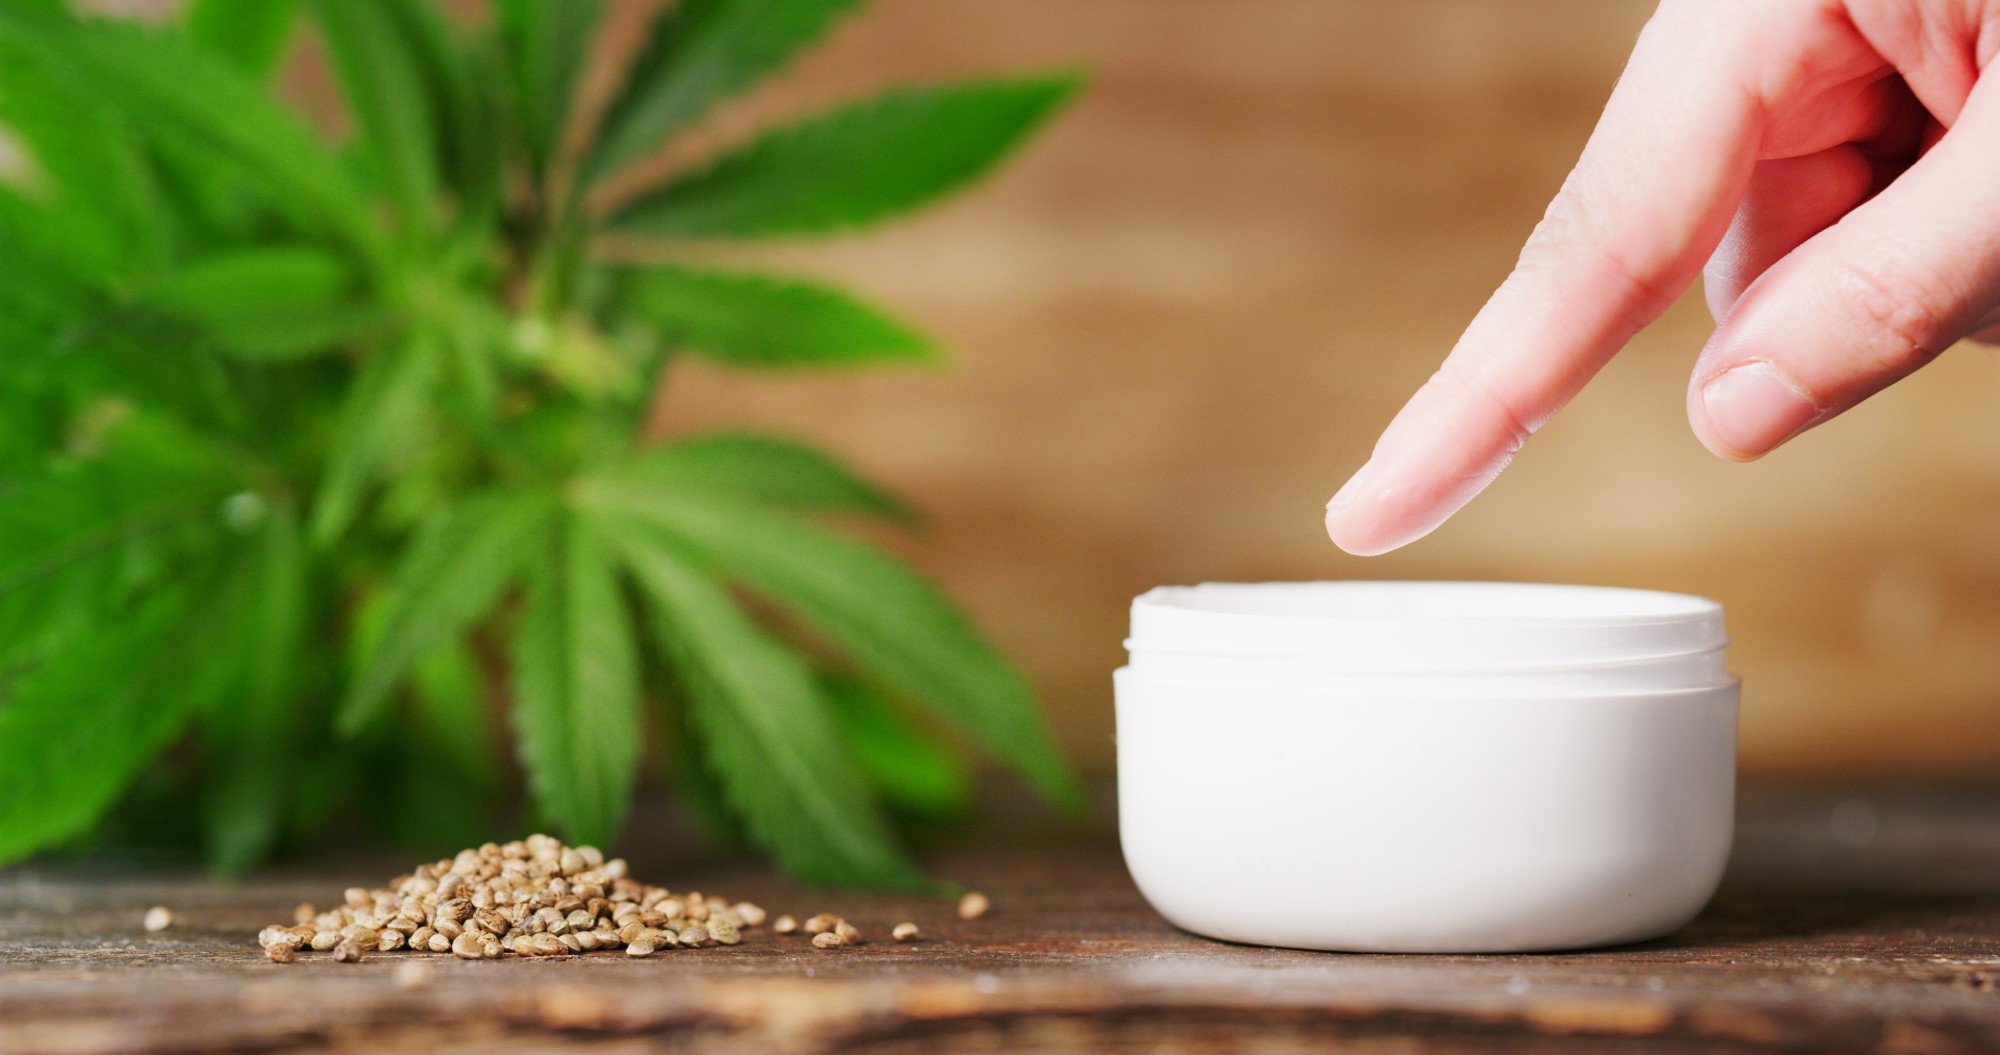 hand and CBD cream with seeds and leaves in background